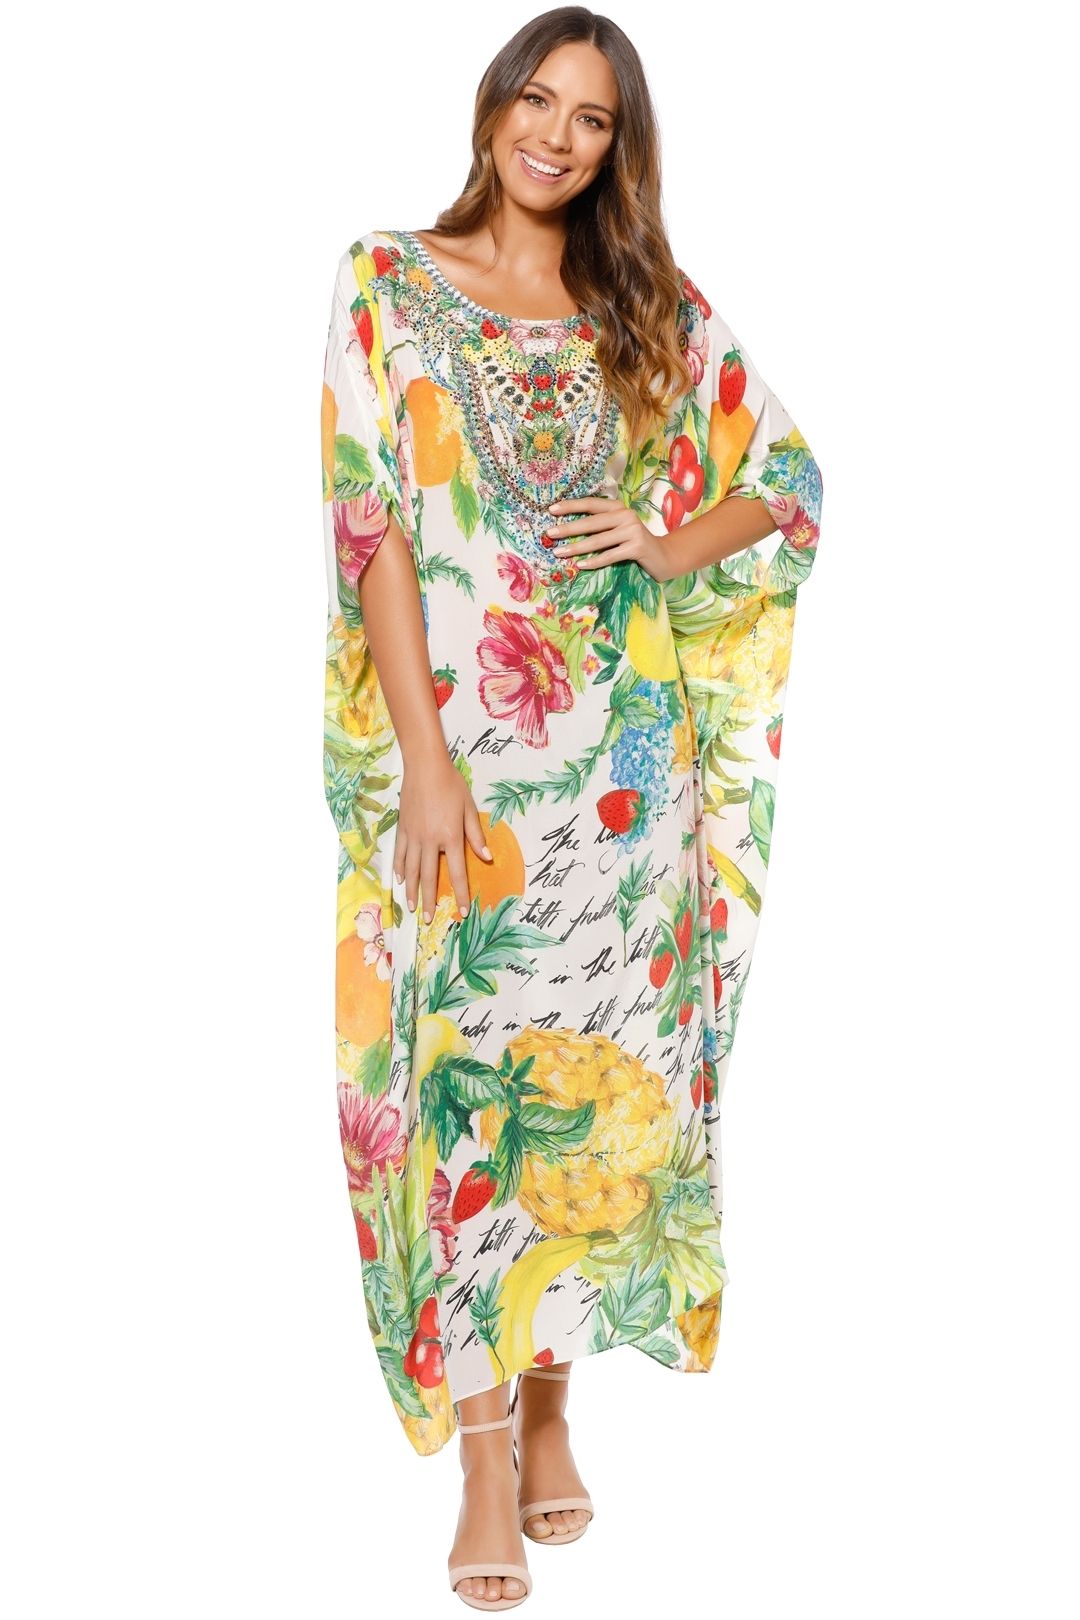 Camilla - There's No Place Like Rio Round Neck Kaftan - Prints - Front